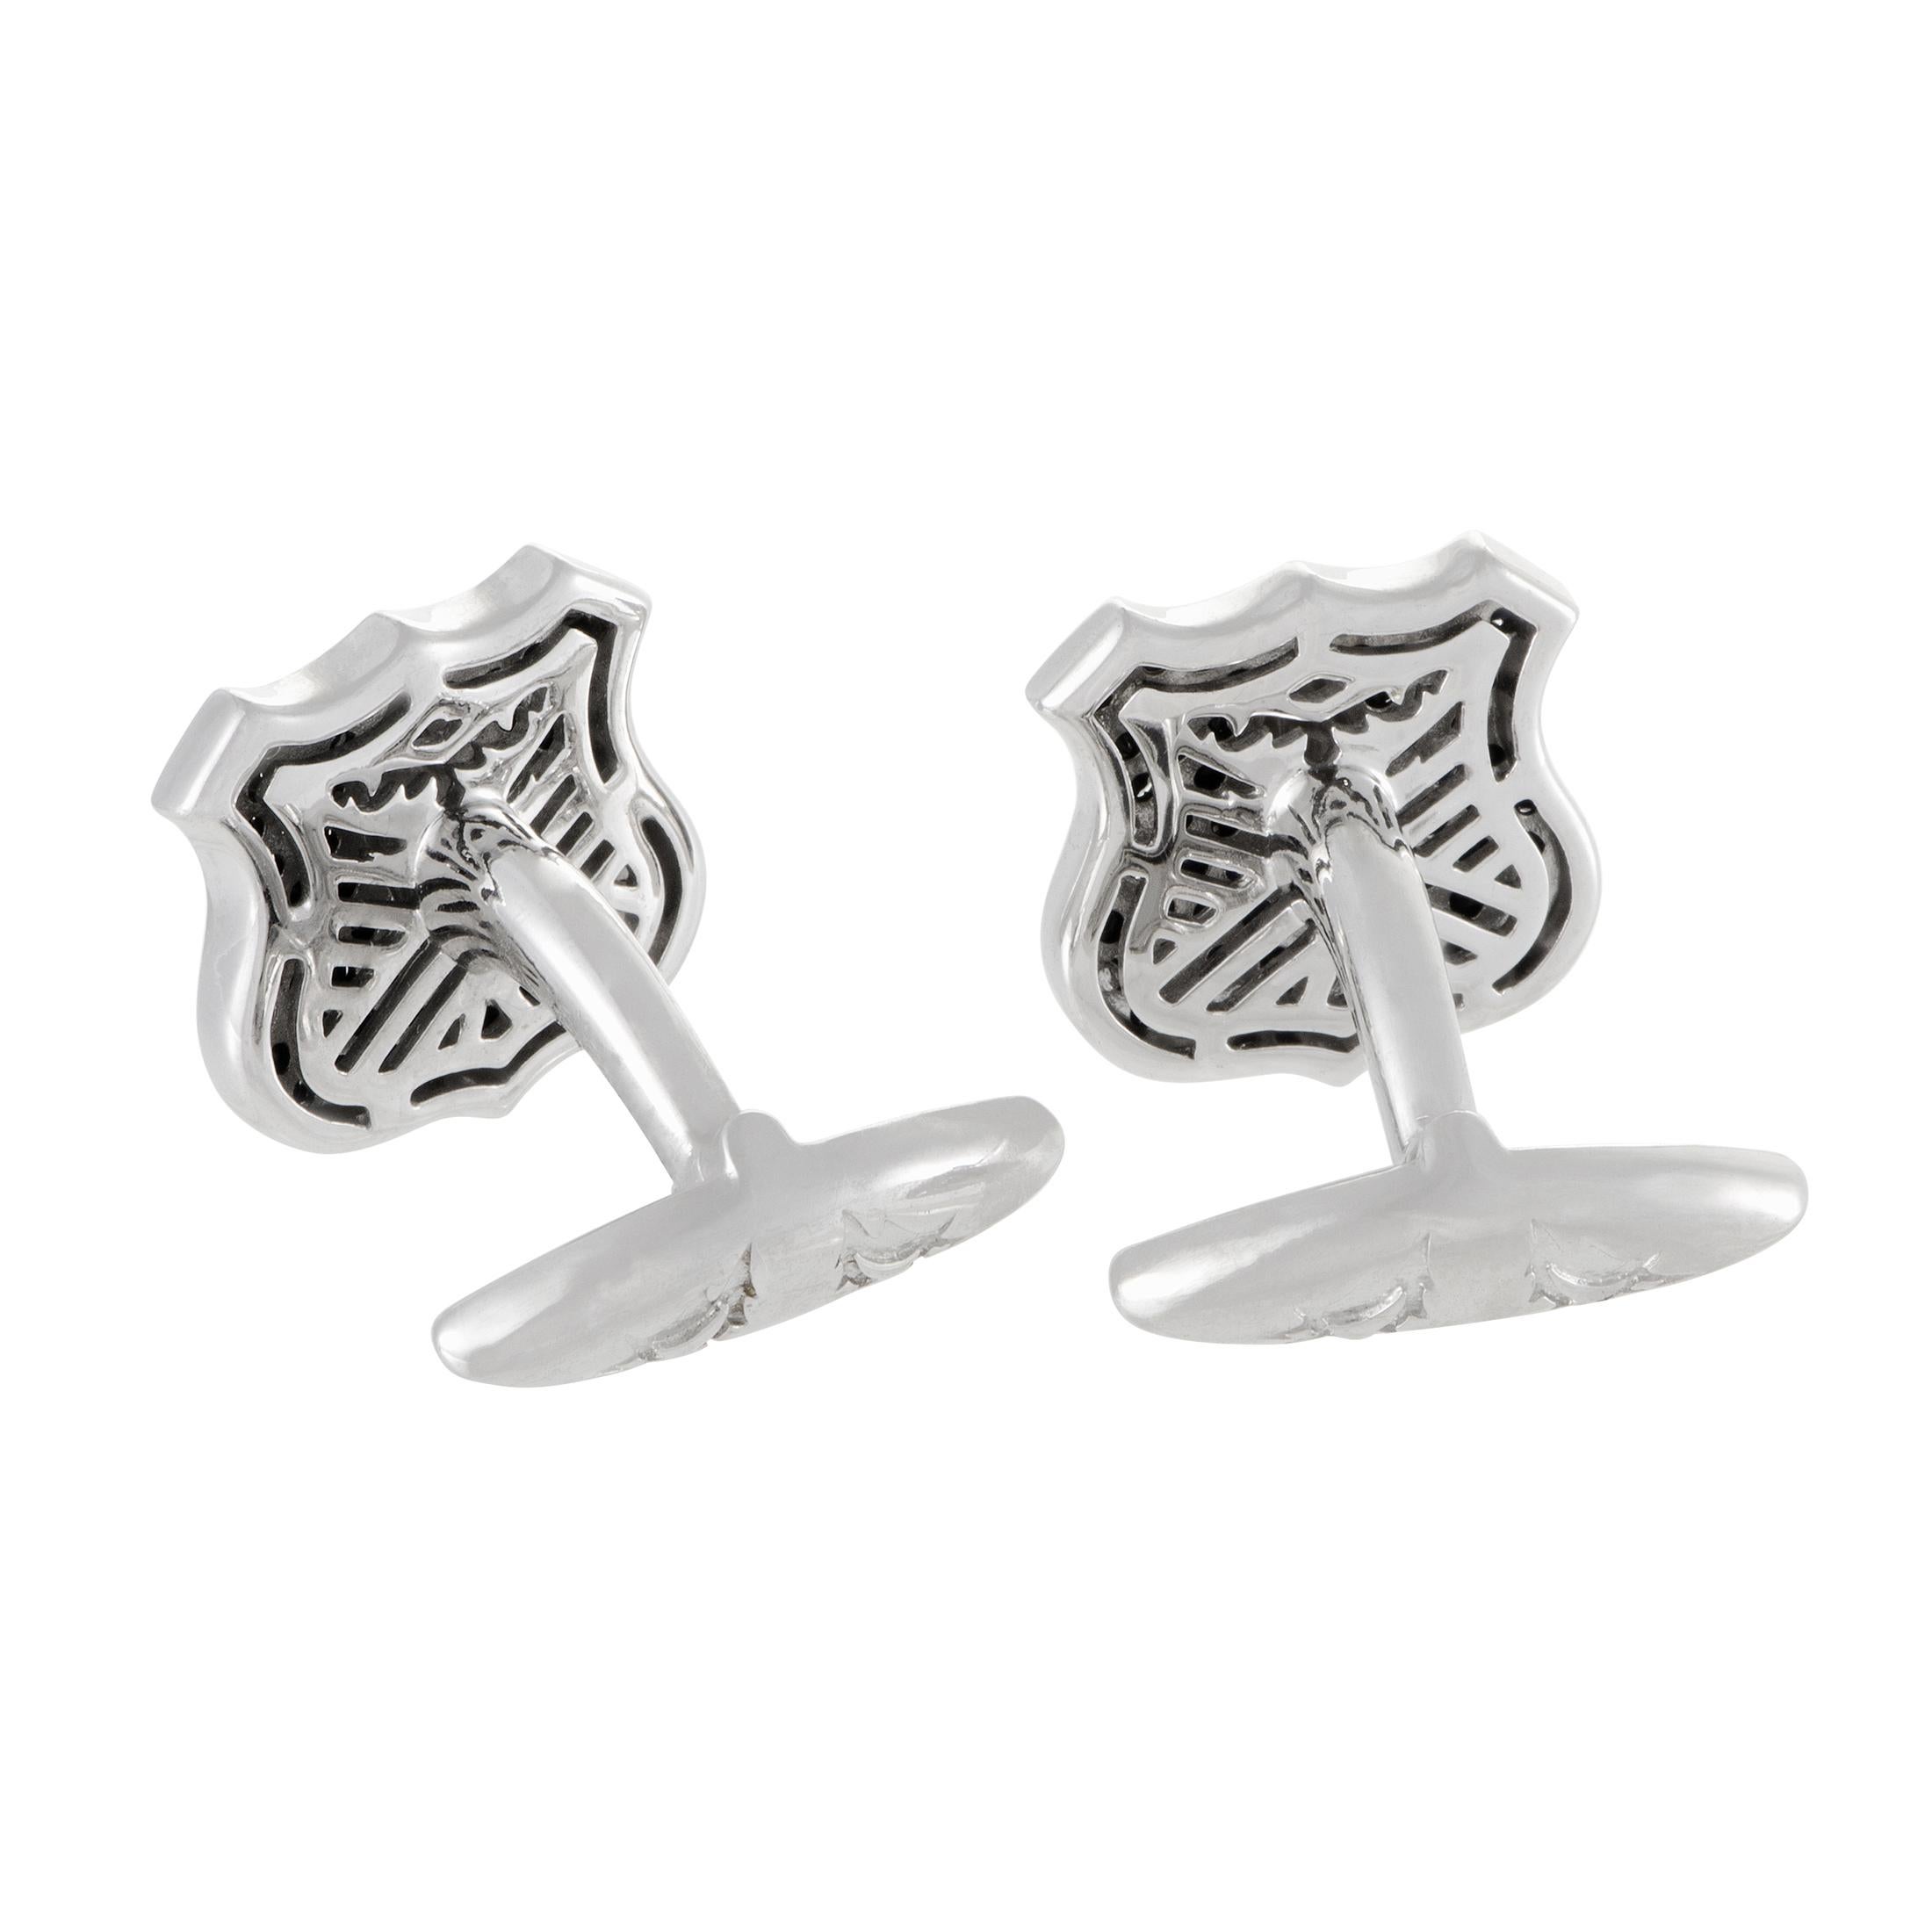 Designed in the attractive shape of shields and set with striking black sapphires weighing in total 1.73 carats, these fascinating silver cufflinks from Stephen Webster are exquisitely crafted items from the renowned ?Highwayman? collection.
